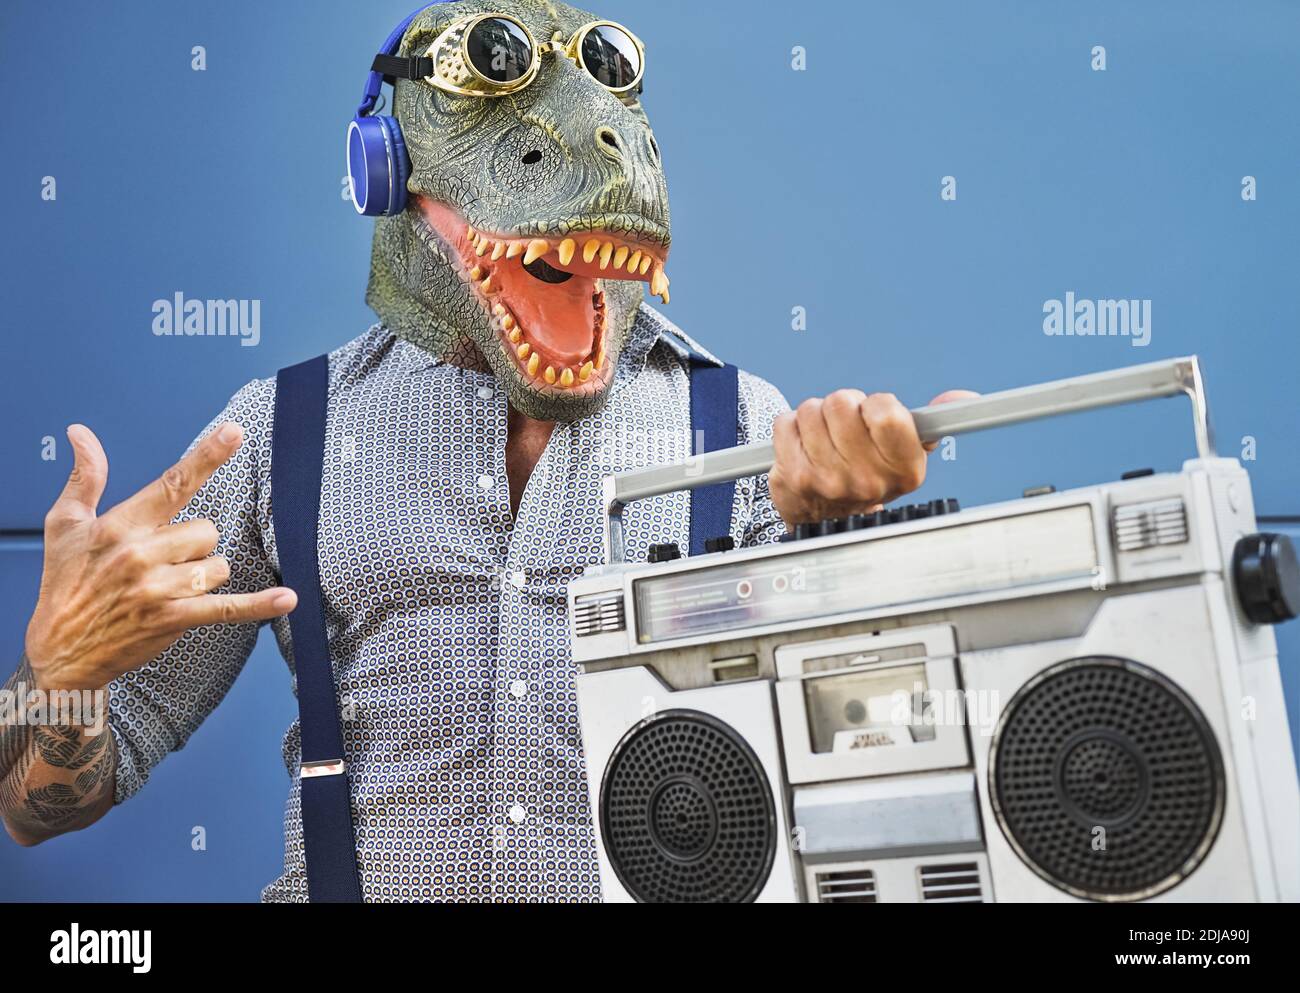 Crazy senior man having fun wearing t-rex mask while listening to music with headphones and vintage boombox stereo outdoor Stock Photo